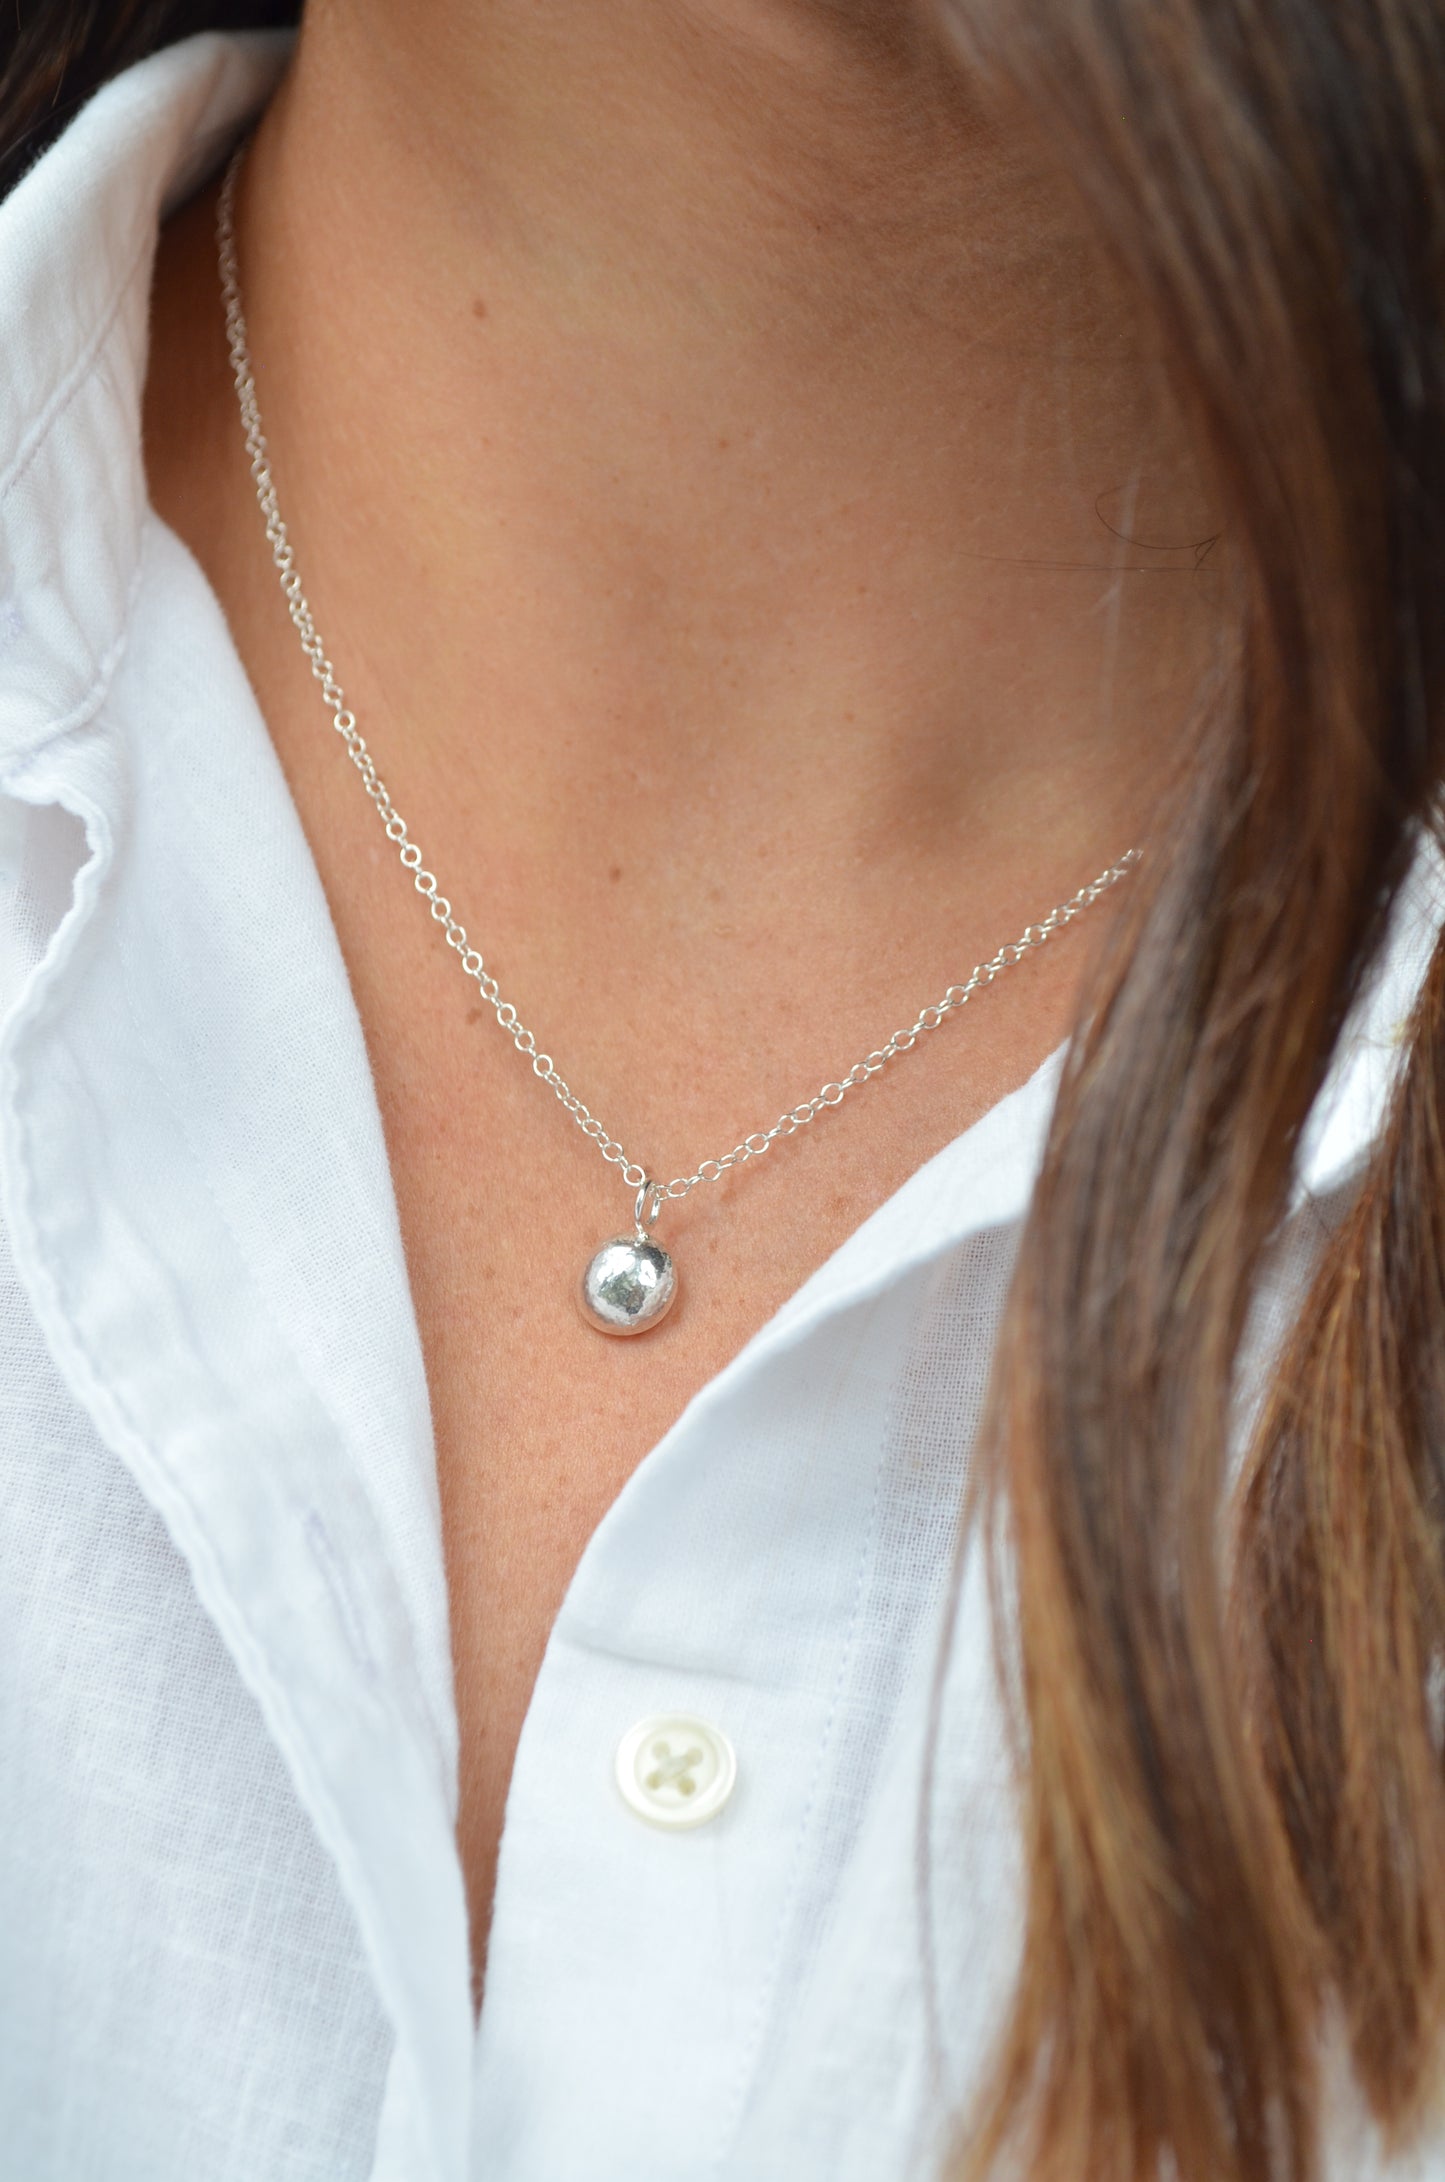 The Penny Charm necklace- sterling silver and 22ct gold vermeil charms on a trace chain necklace